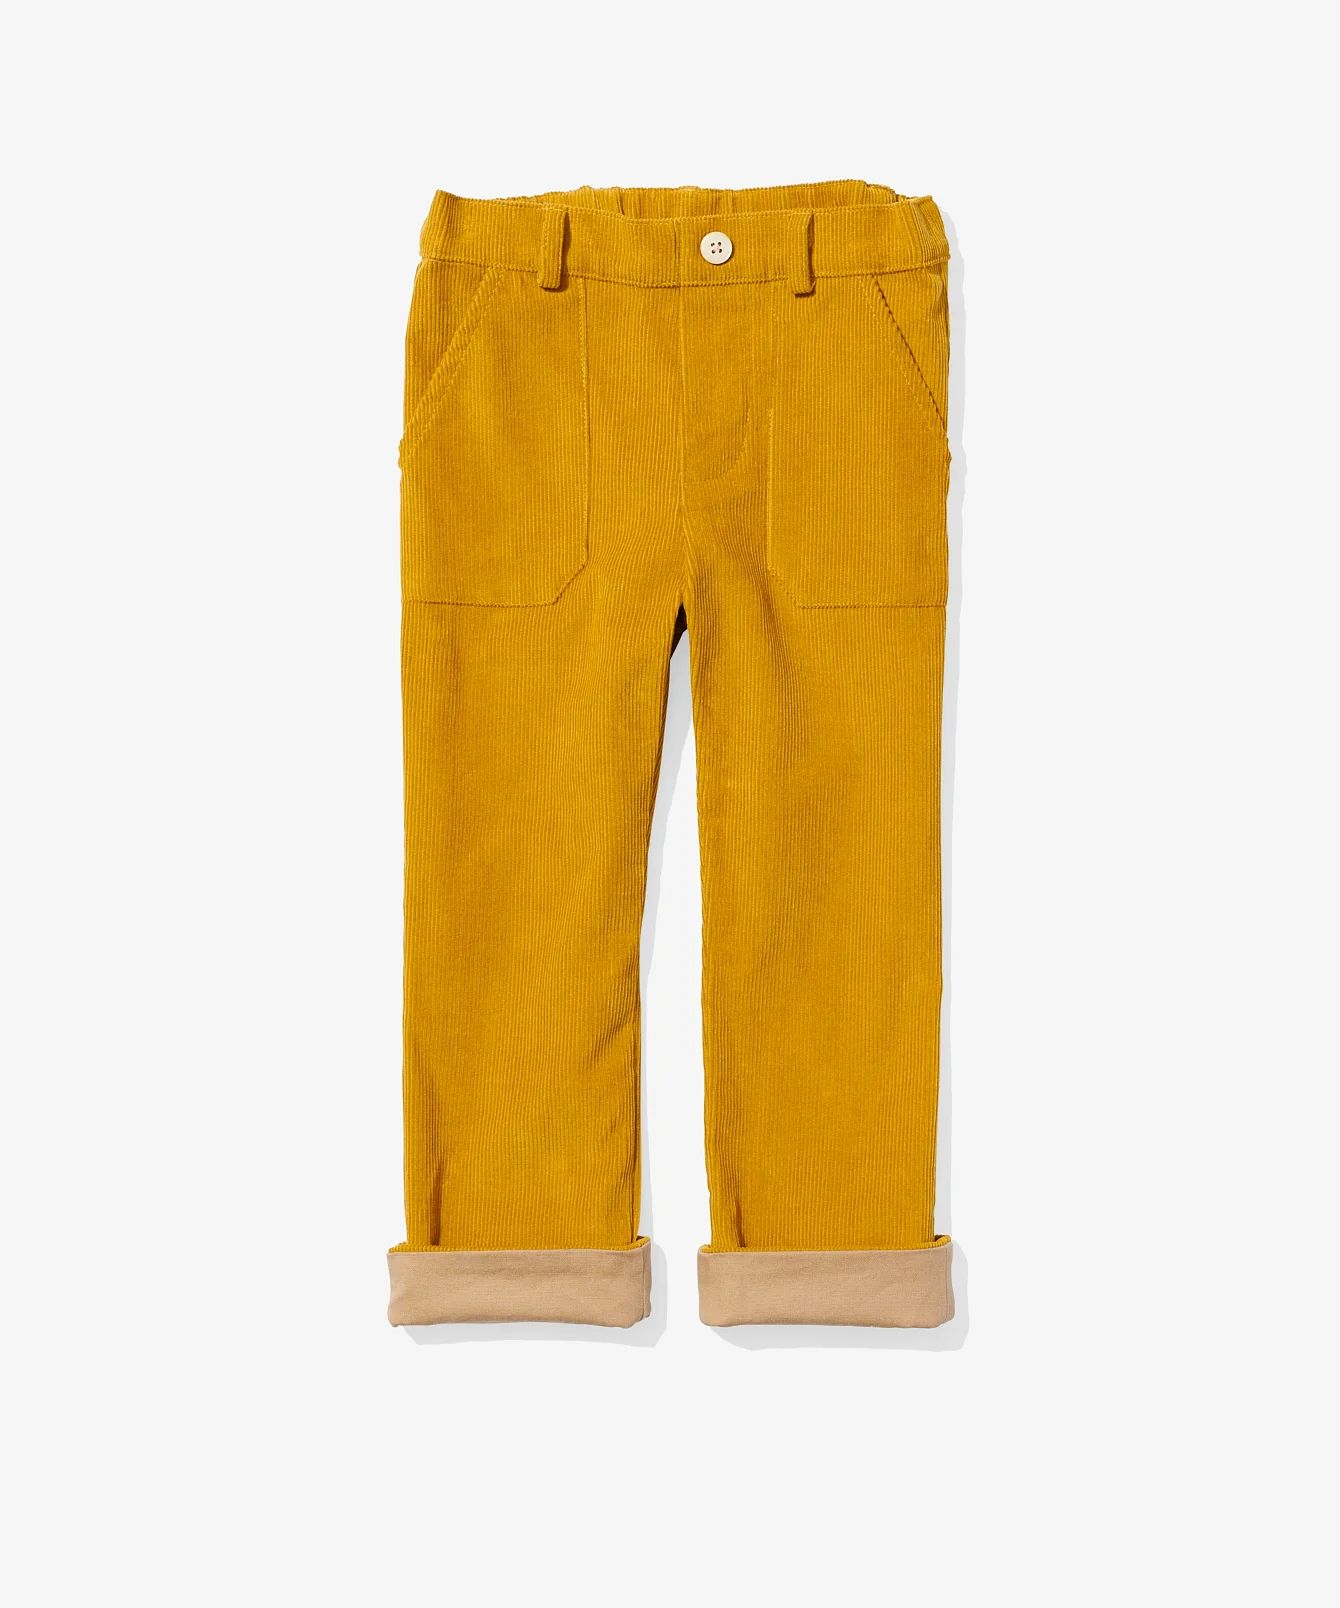 Grow Toddler, Boy's and Girl's Pants In Mustard | Oso & Me | Oso & Me